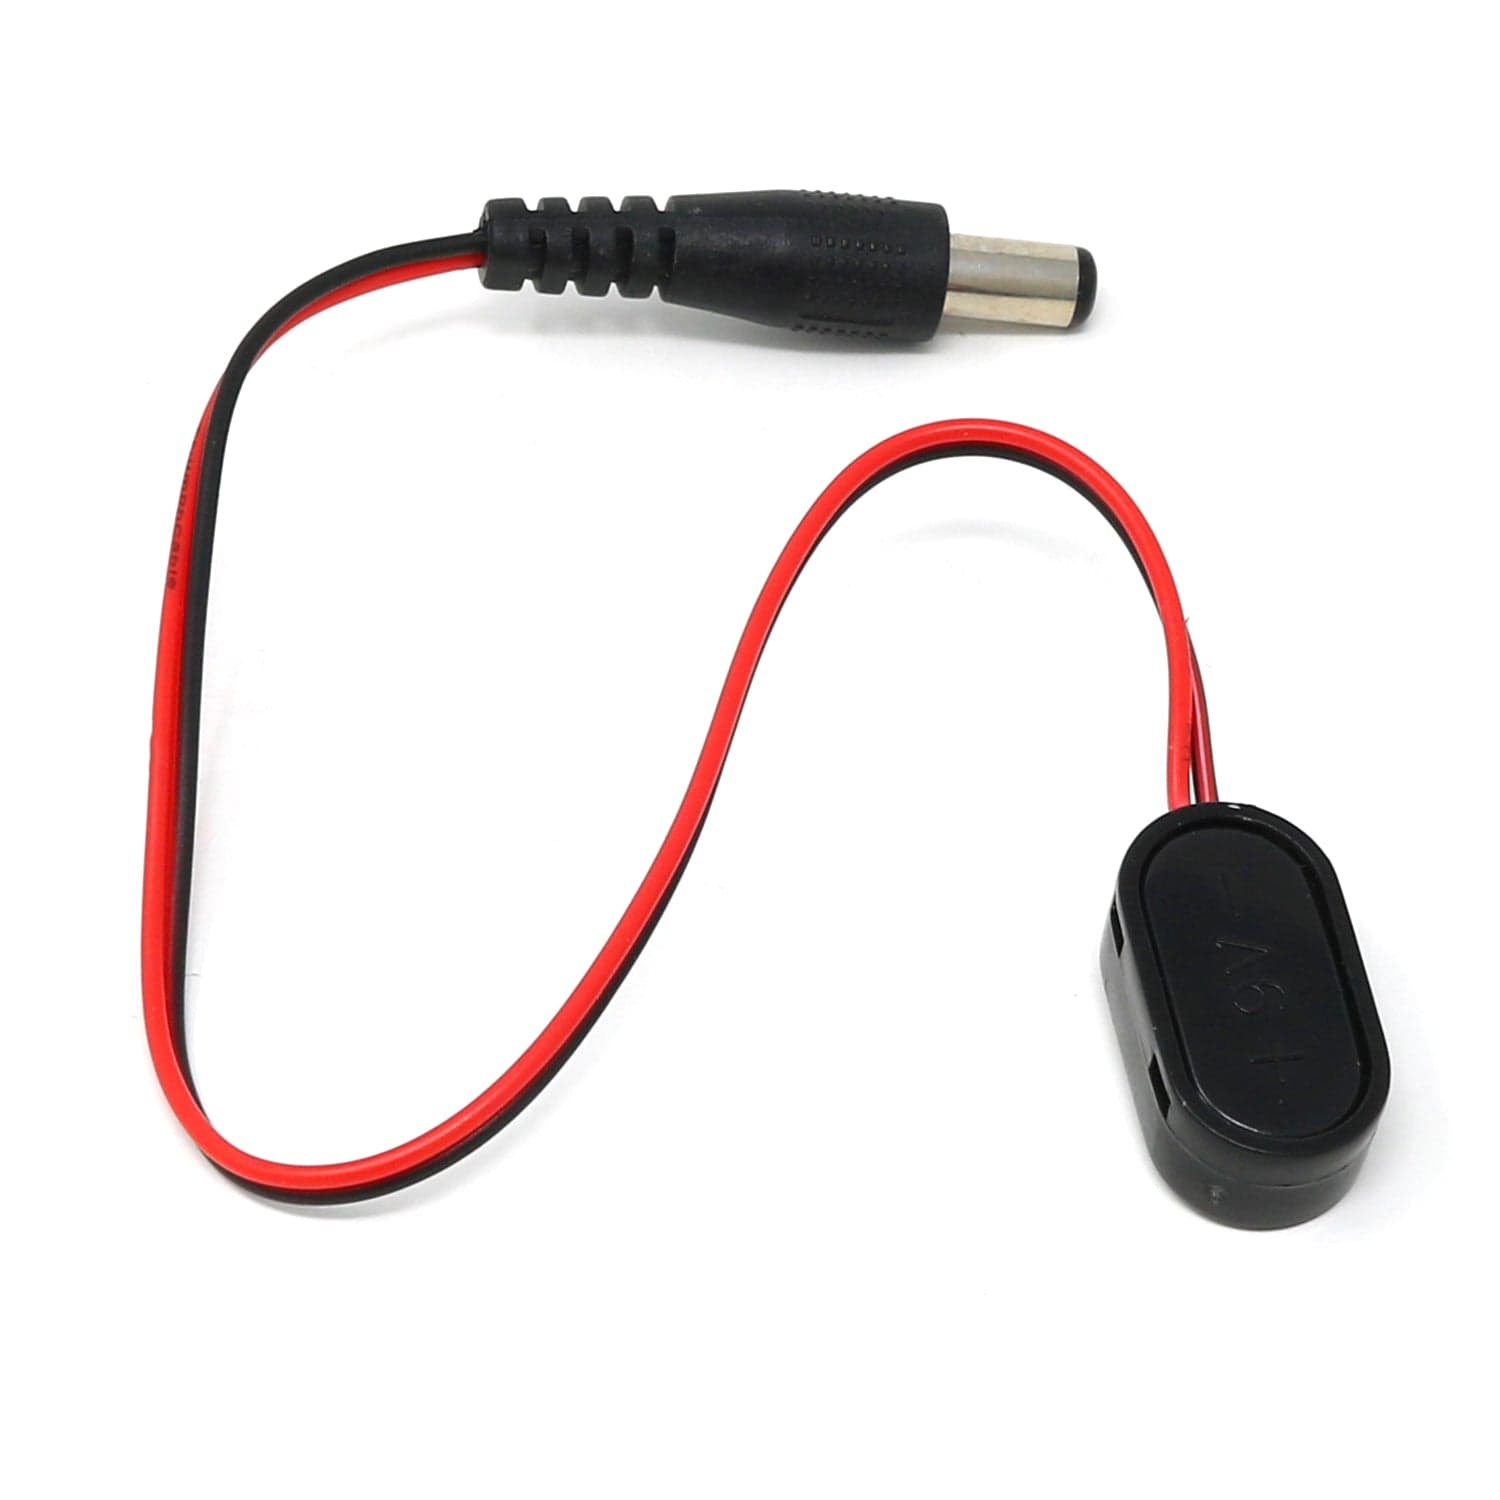 9V battery clip with  5.5mm/2.1mm plug - The Pi Hut